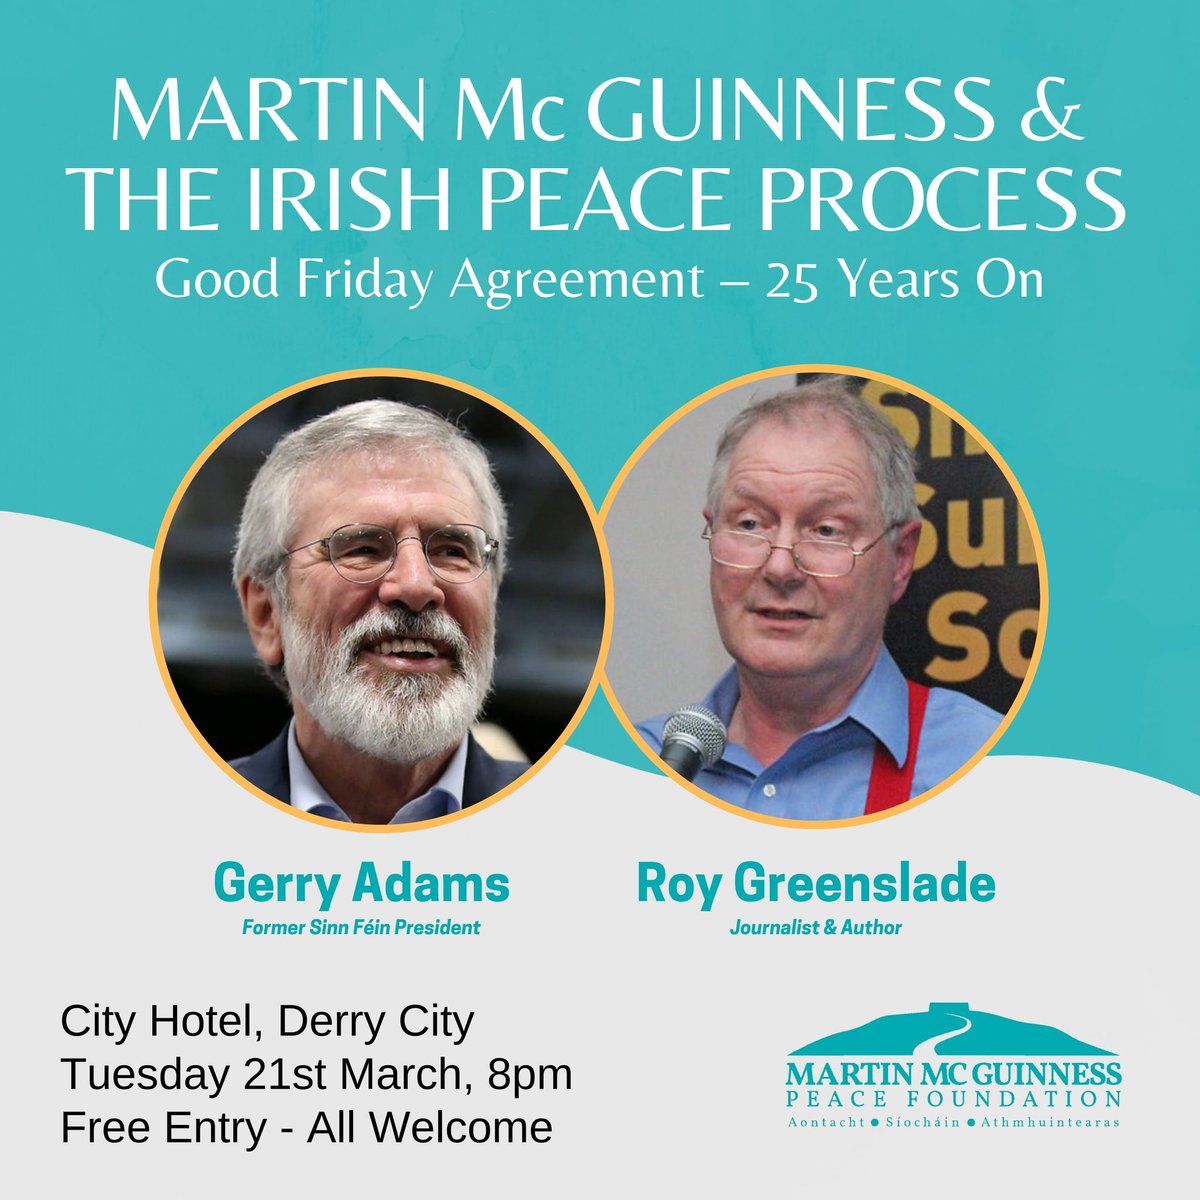 Our Chieftain Martin McGuinness 6th anniversary will be on March 21st To mark the occasion & his role in the Good Friday Agreement @GerryAdamsSF will be in conversation with Roy Greenslade in the City Hotel, Derry, 8pm Tuesday 21st Martin's family would appreciate you being there